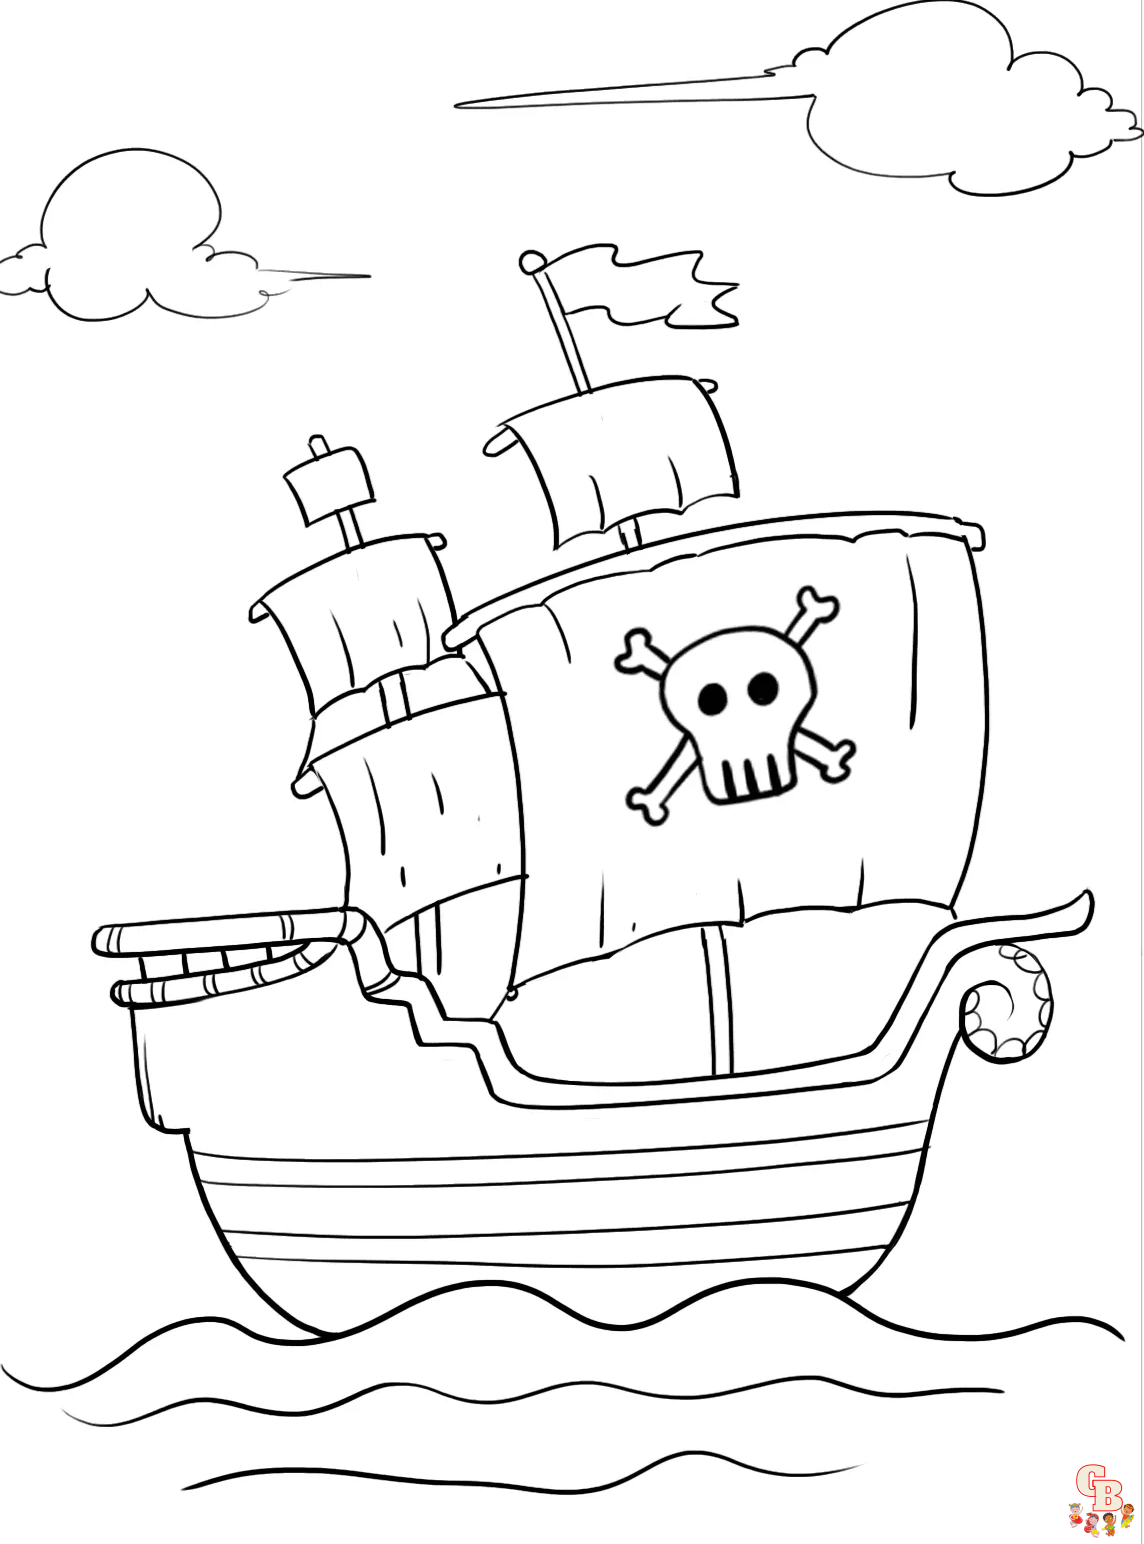 Pirate ship coloring free printable sheets for kids